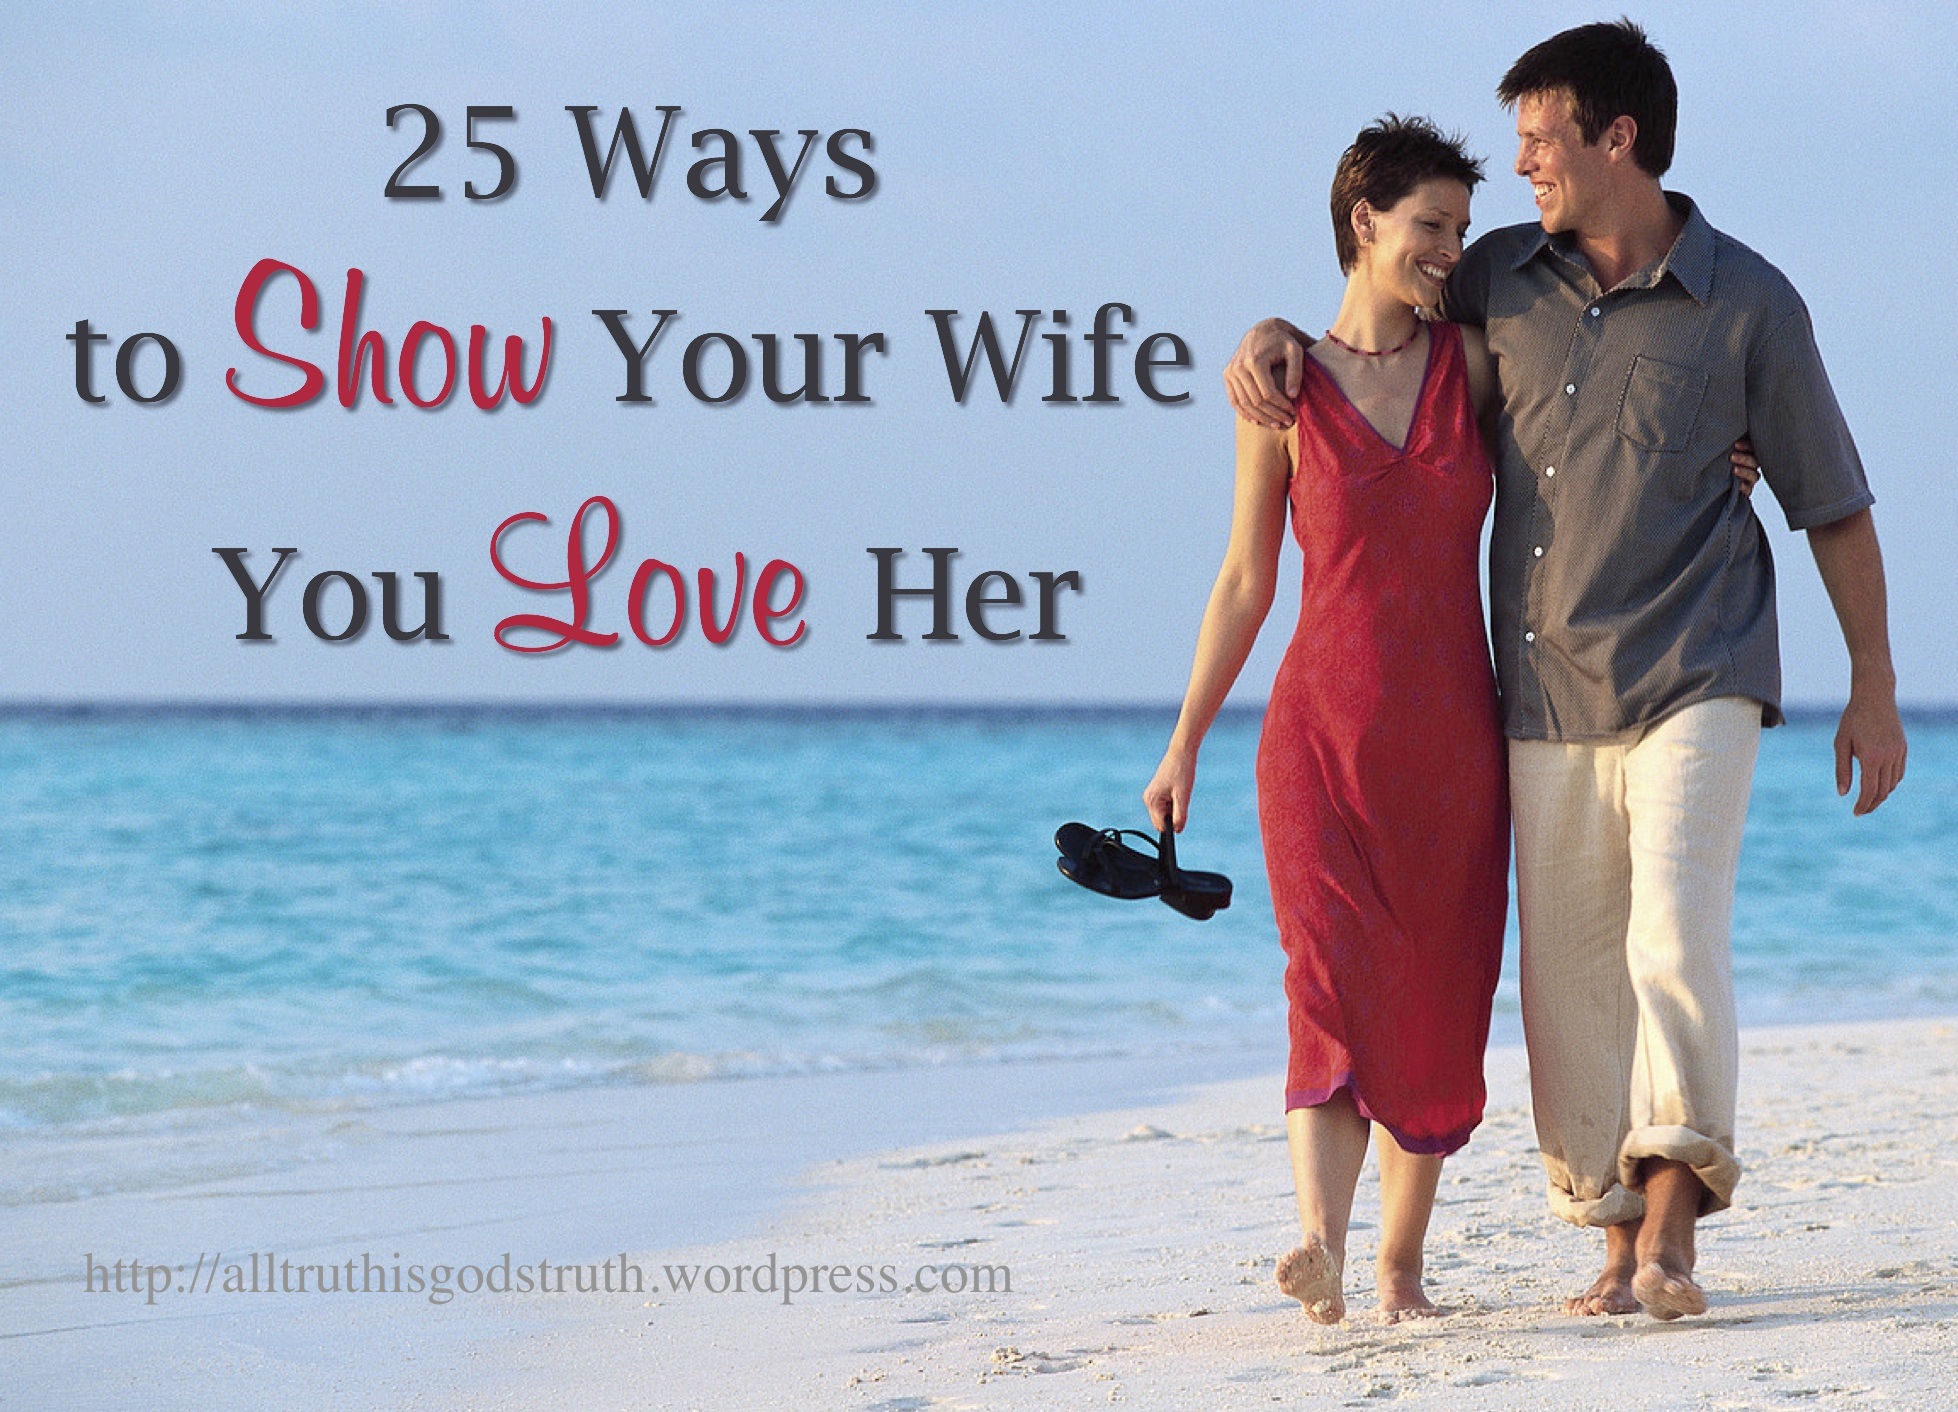 25 Ways to Show Your Wife You Love Her